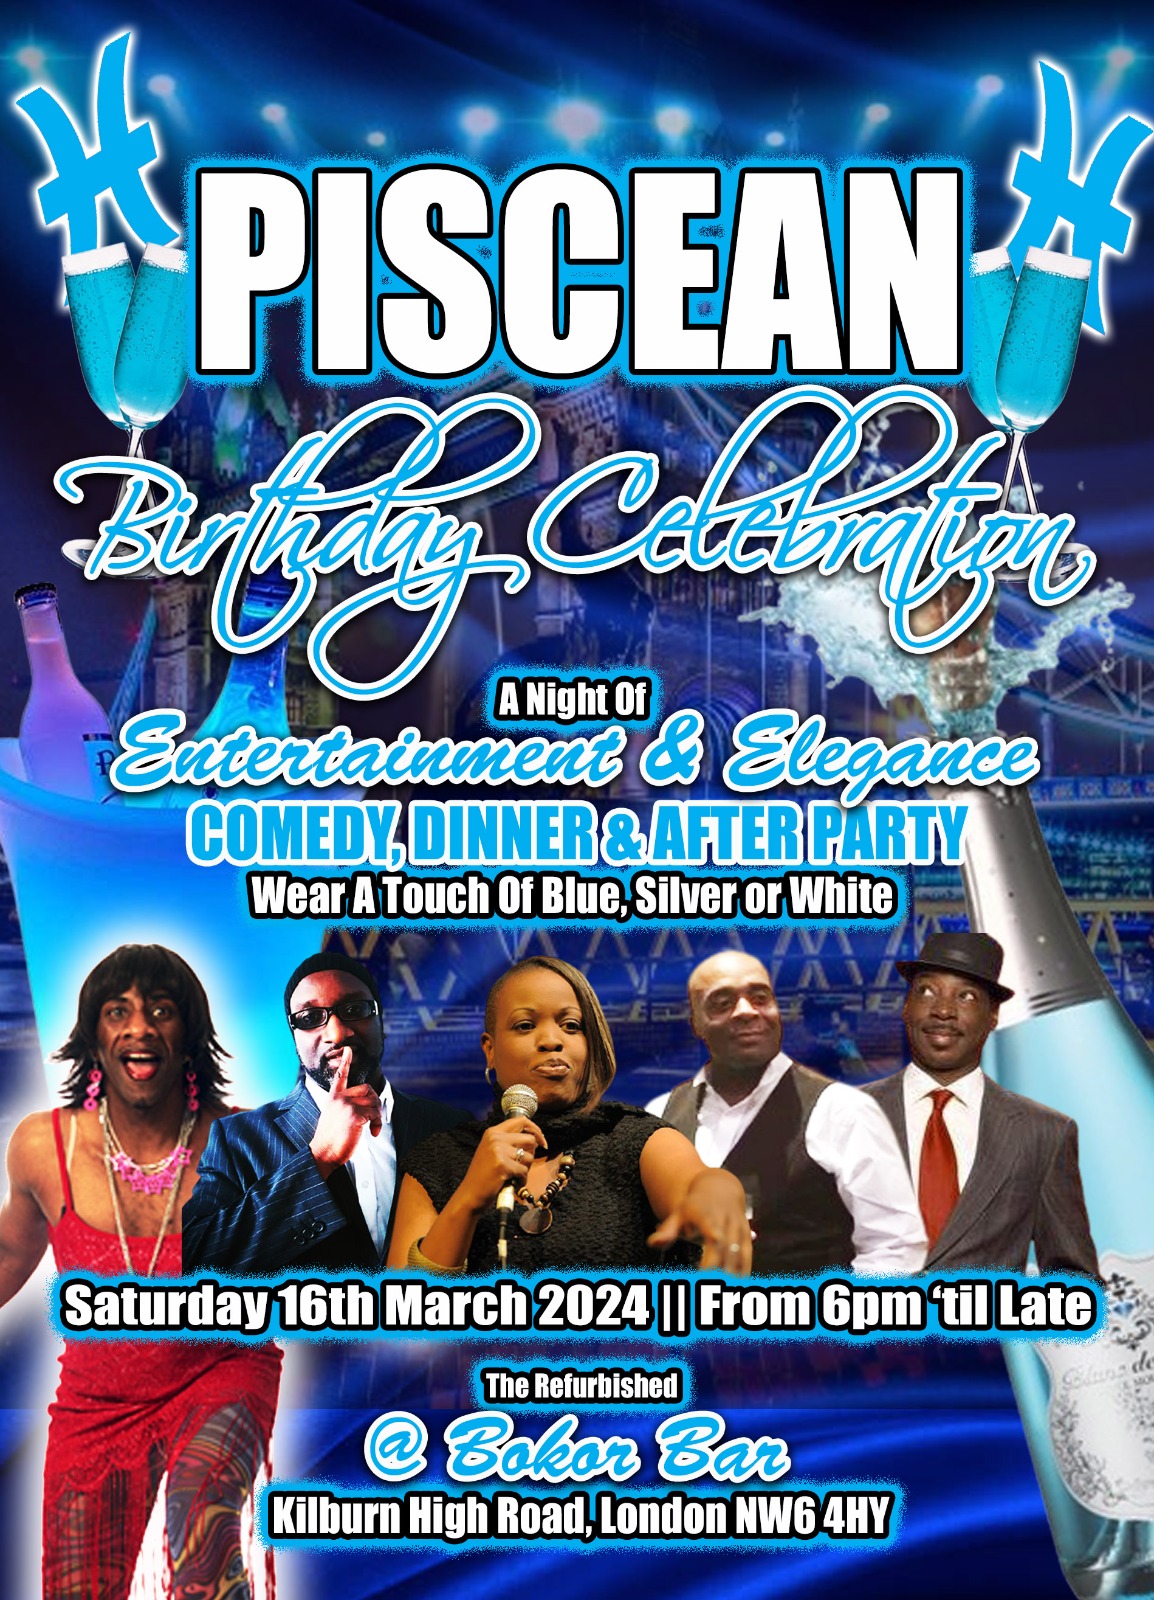 Piscean Comedy Dinner & After Party - Get Your Tickets